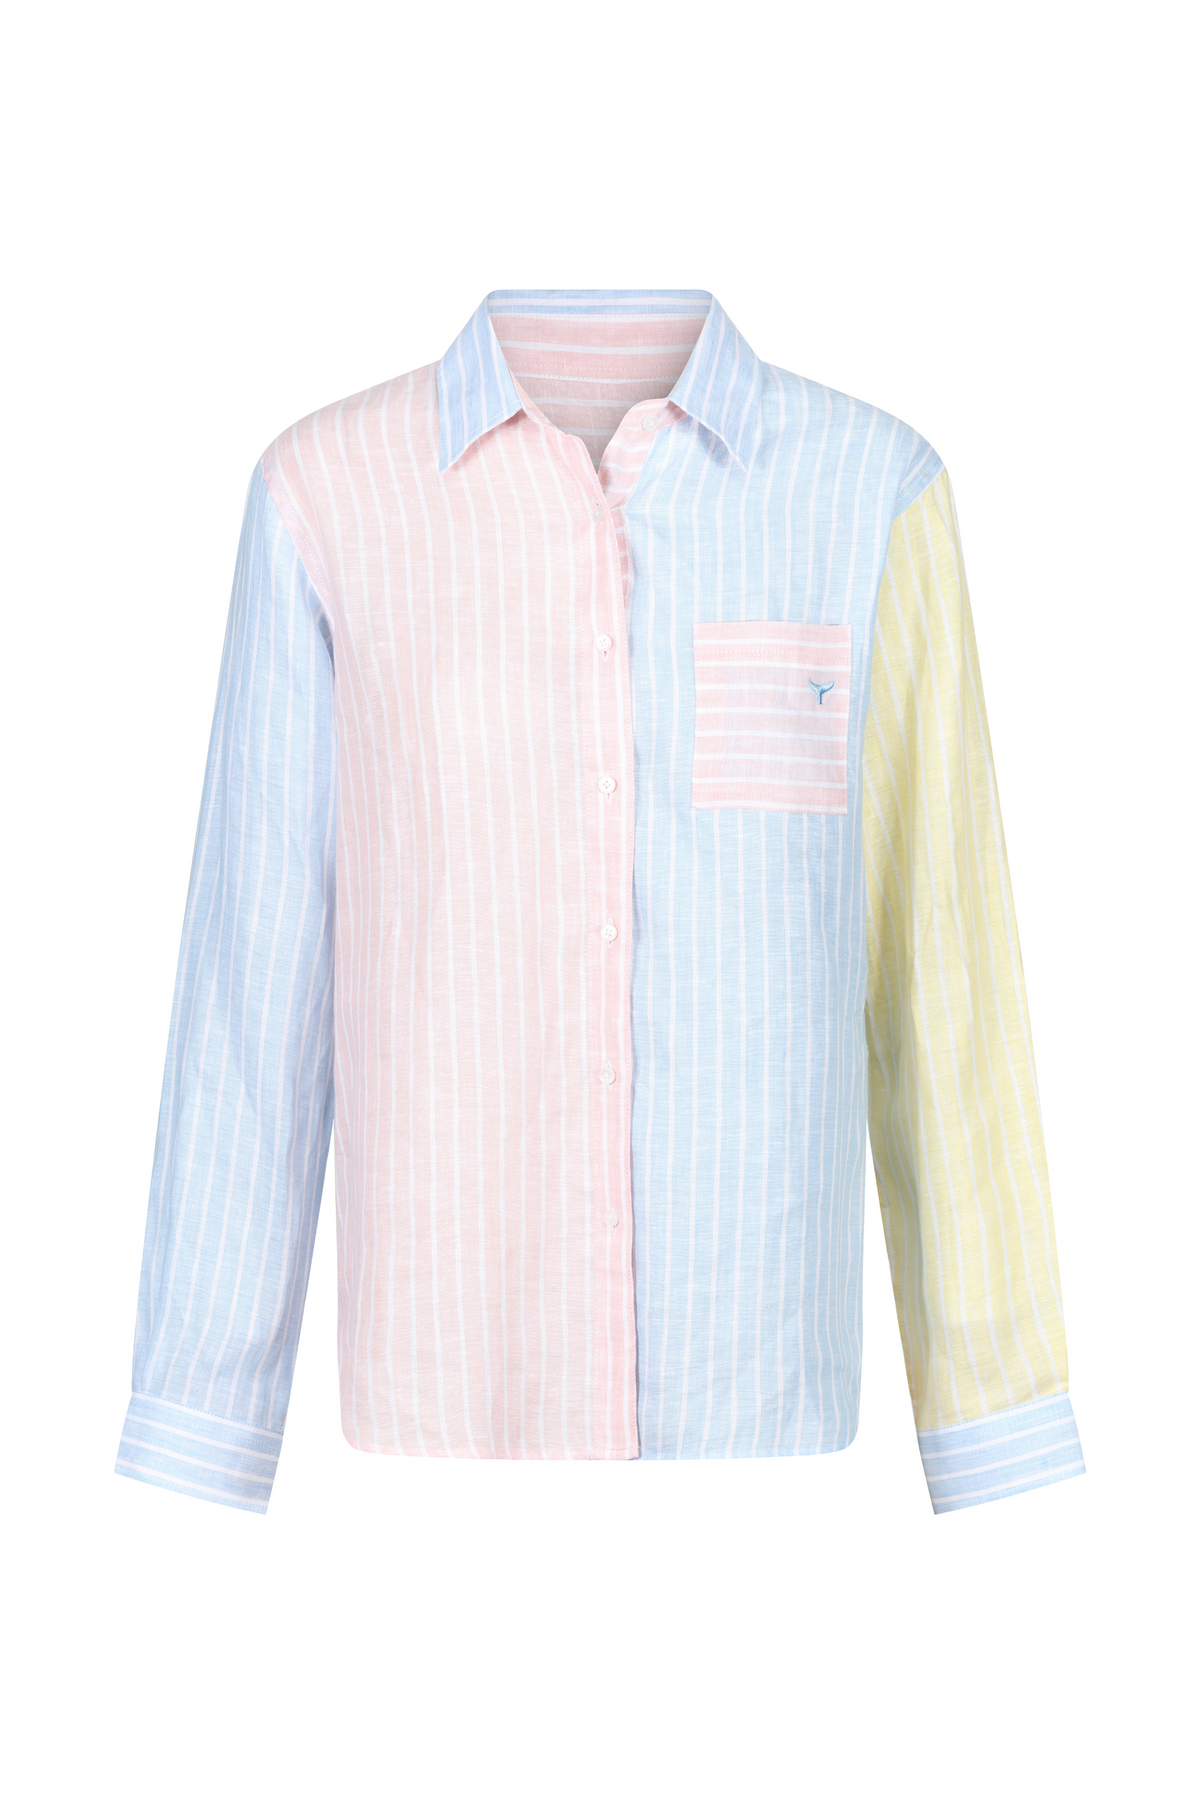 Women's Banbury Linen Shirt - Blue/Pink - Whale Of A Time Clothing